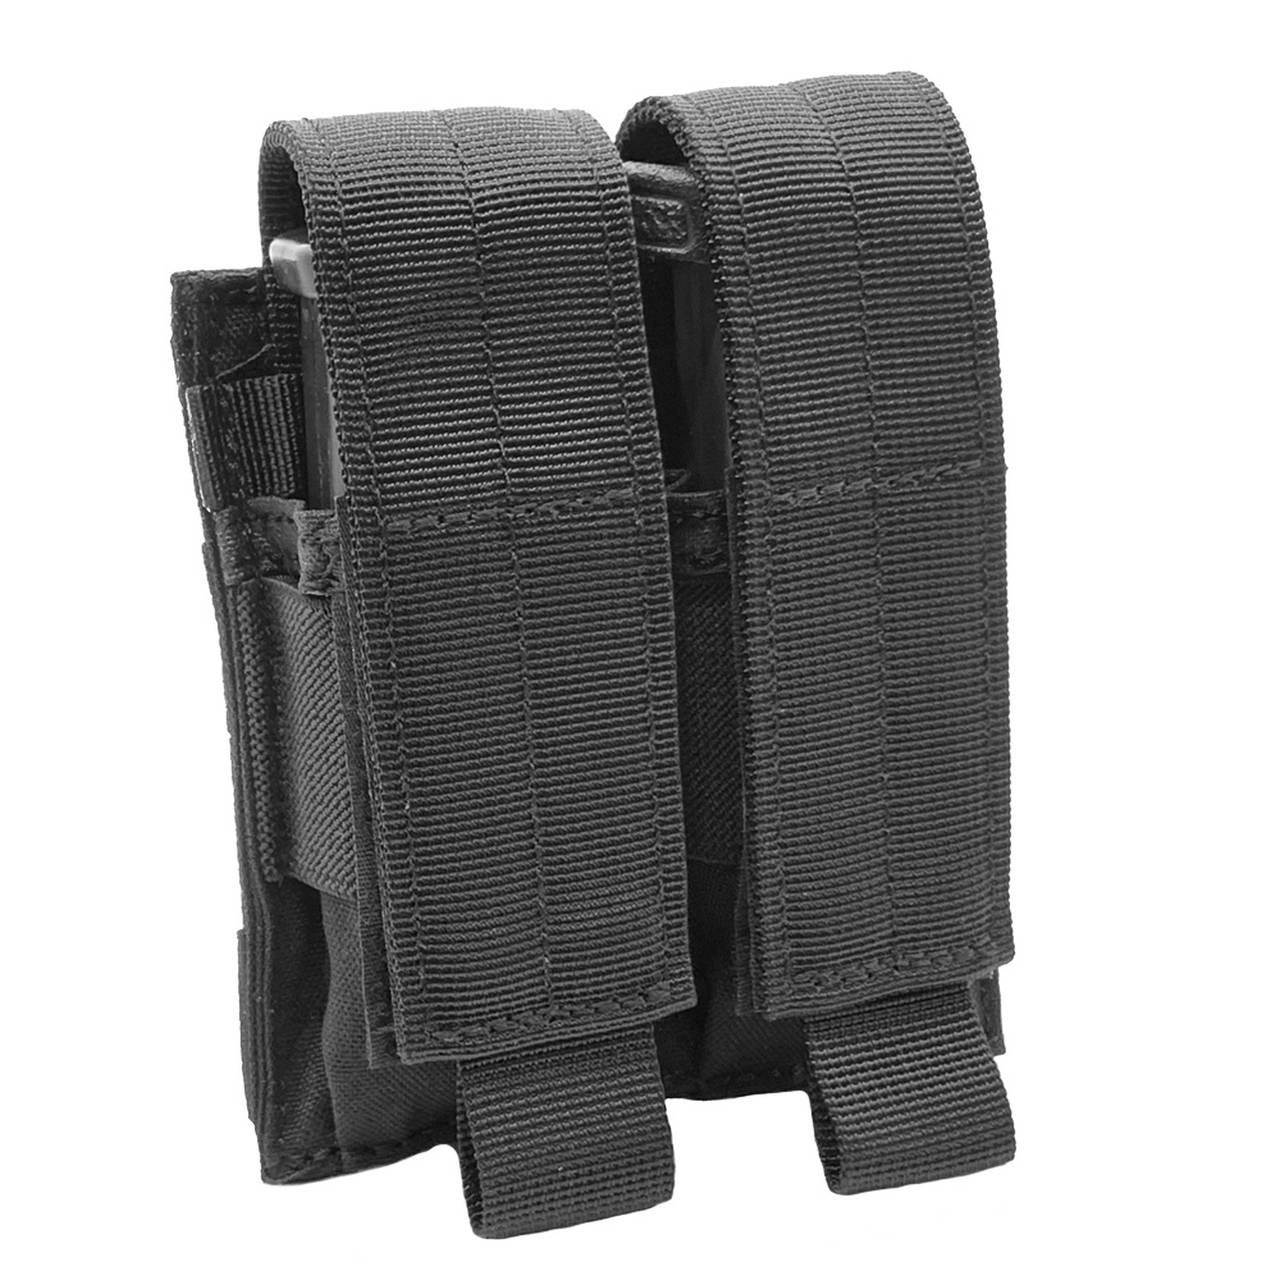 Shellback Tactical The Double Pistol Mag Pouch